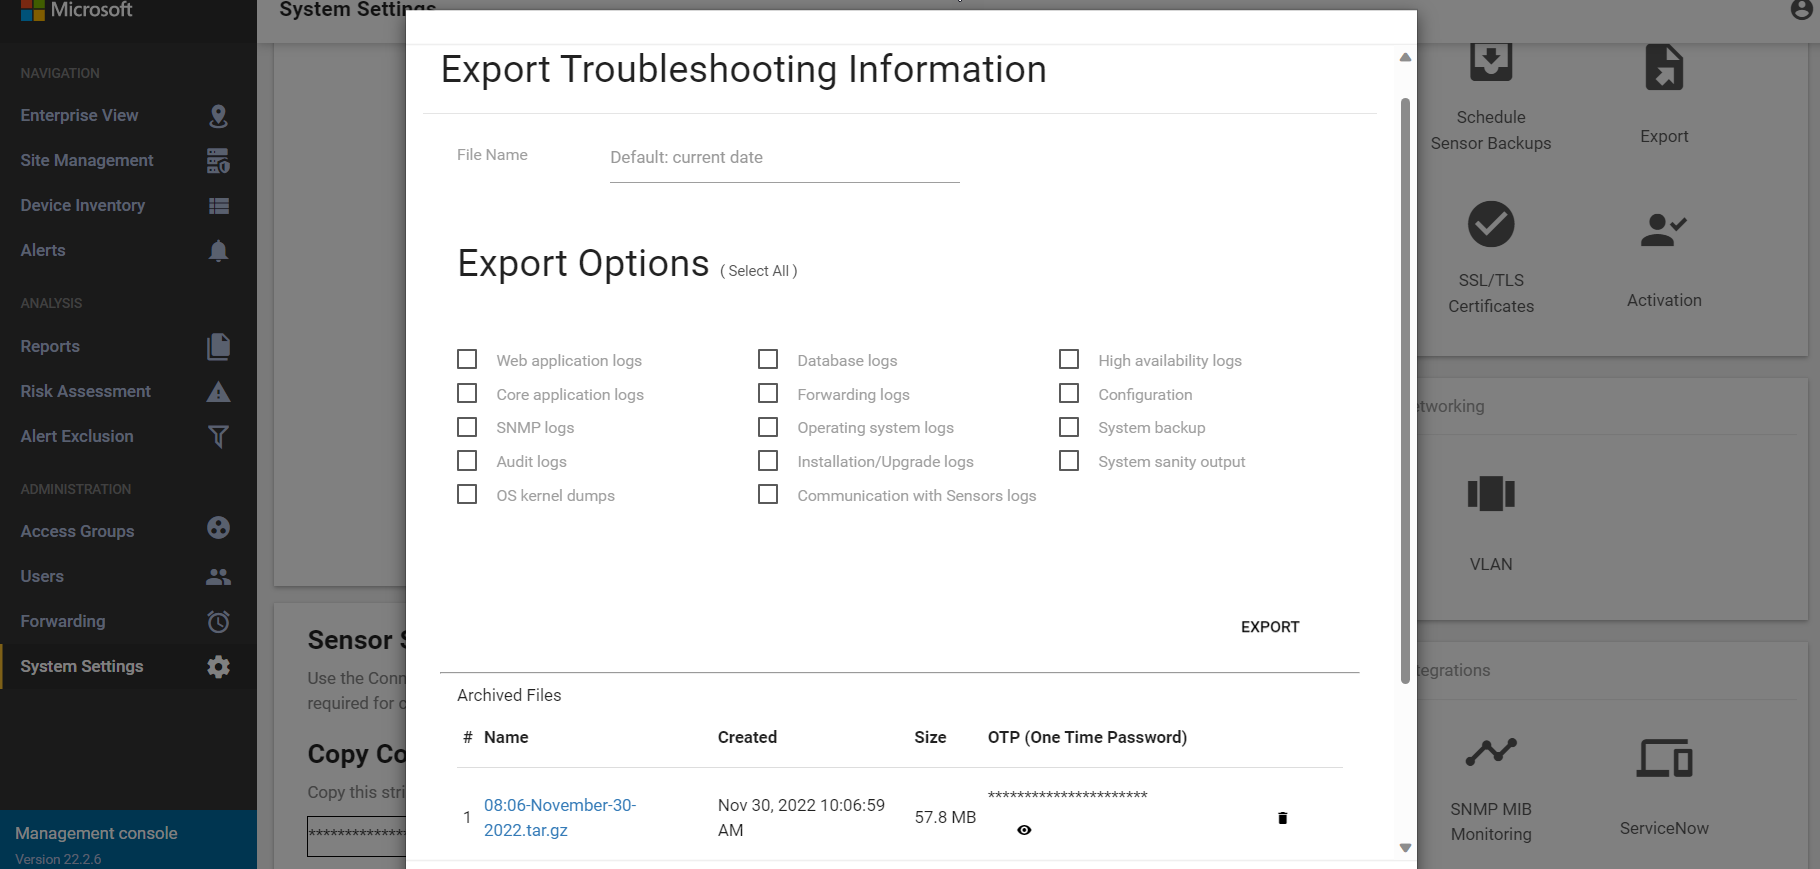 Screenshot of the Export Troubleshooting Information dialog in the on-premises management console.